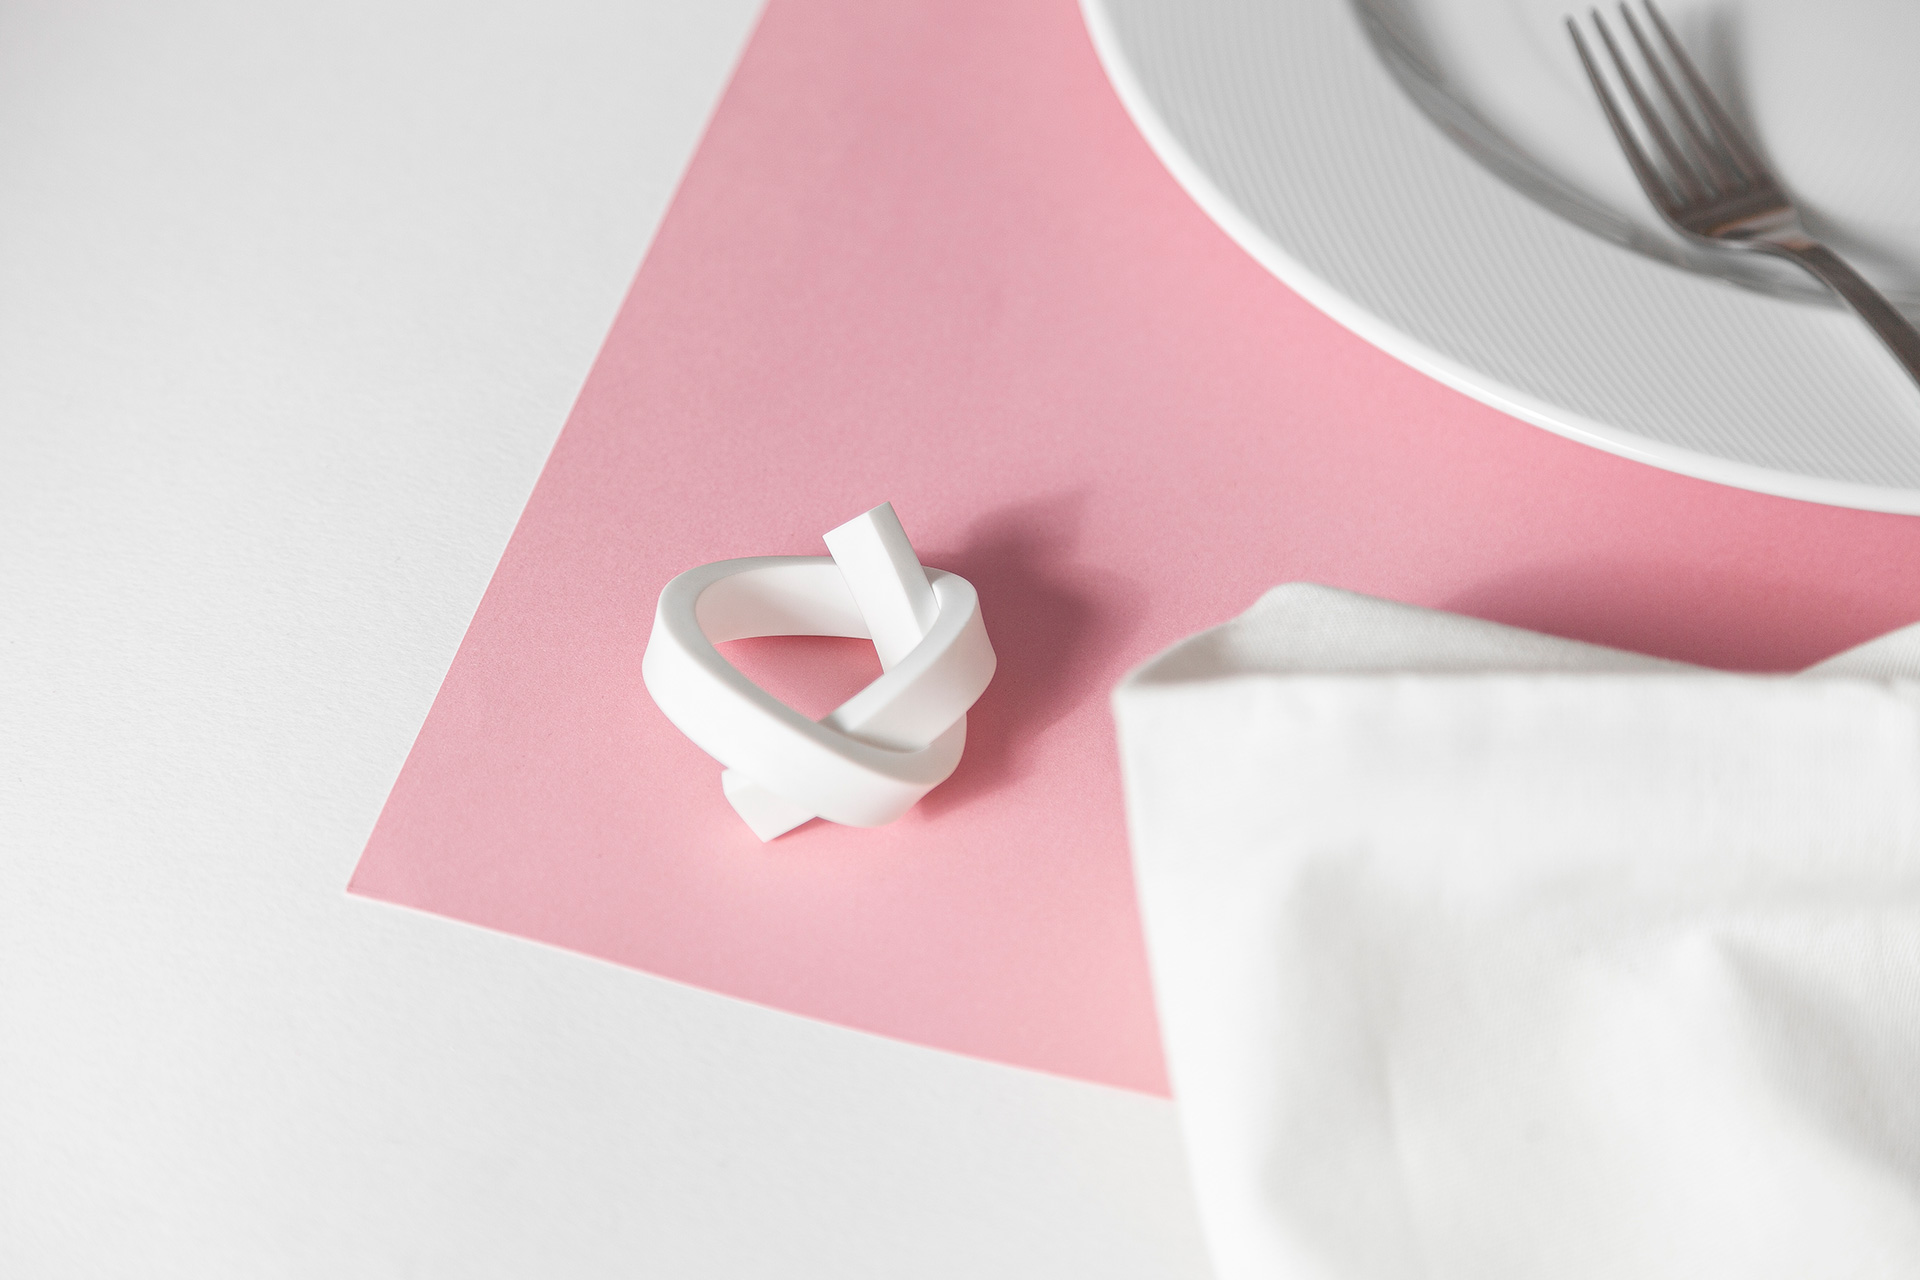 Knot Napkin Ring - DESIGN BY MIGUEL SOEIRO